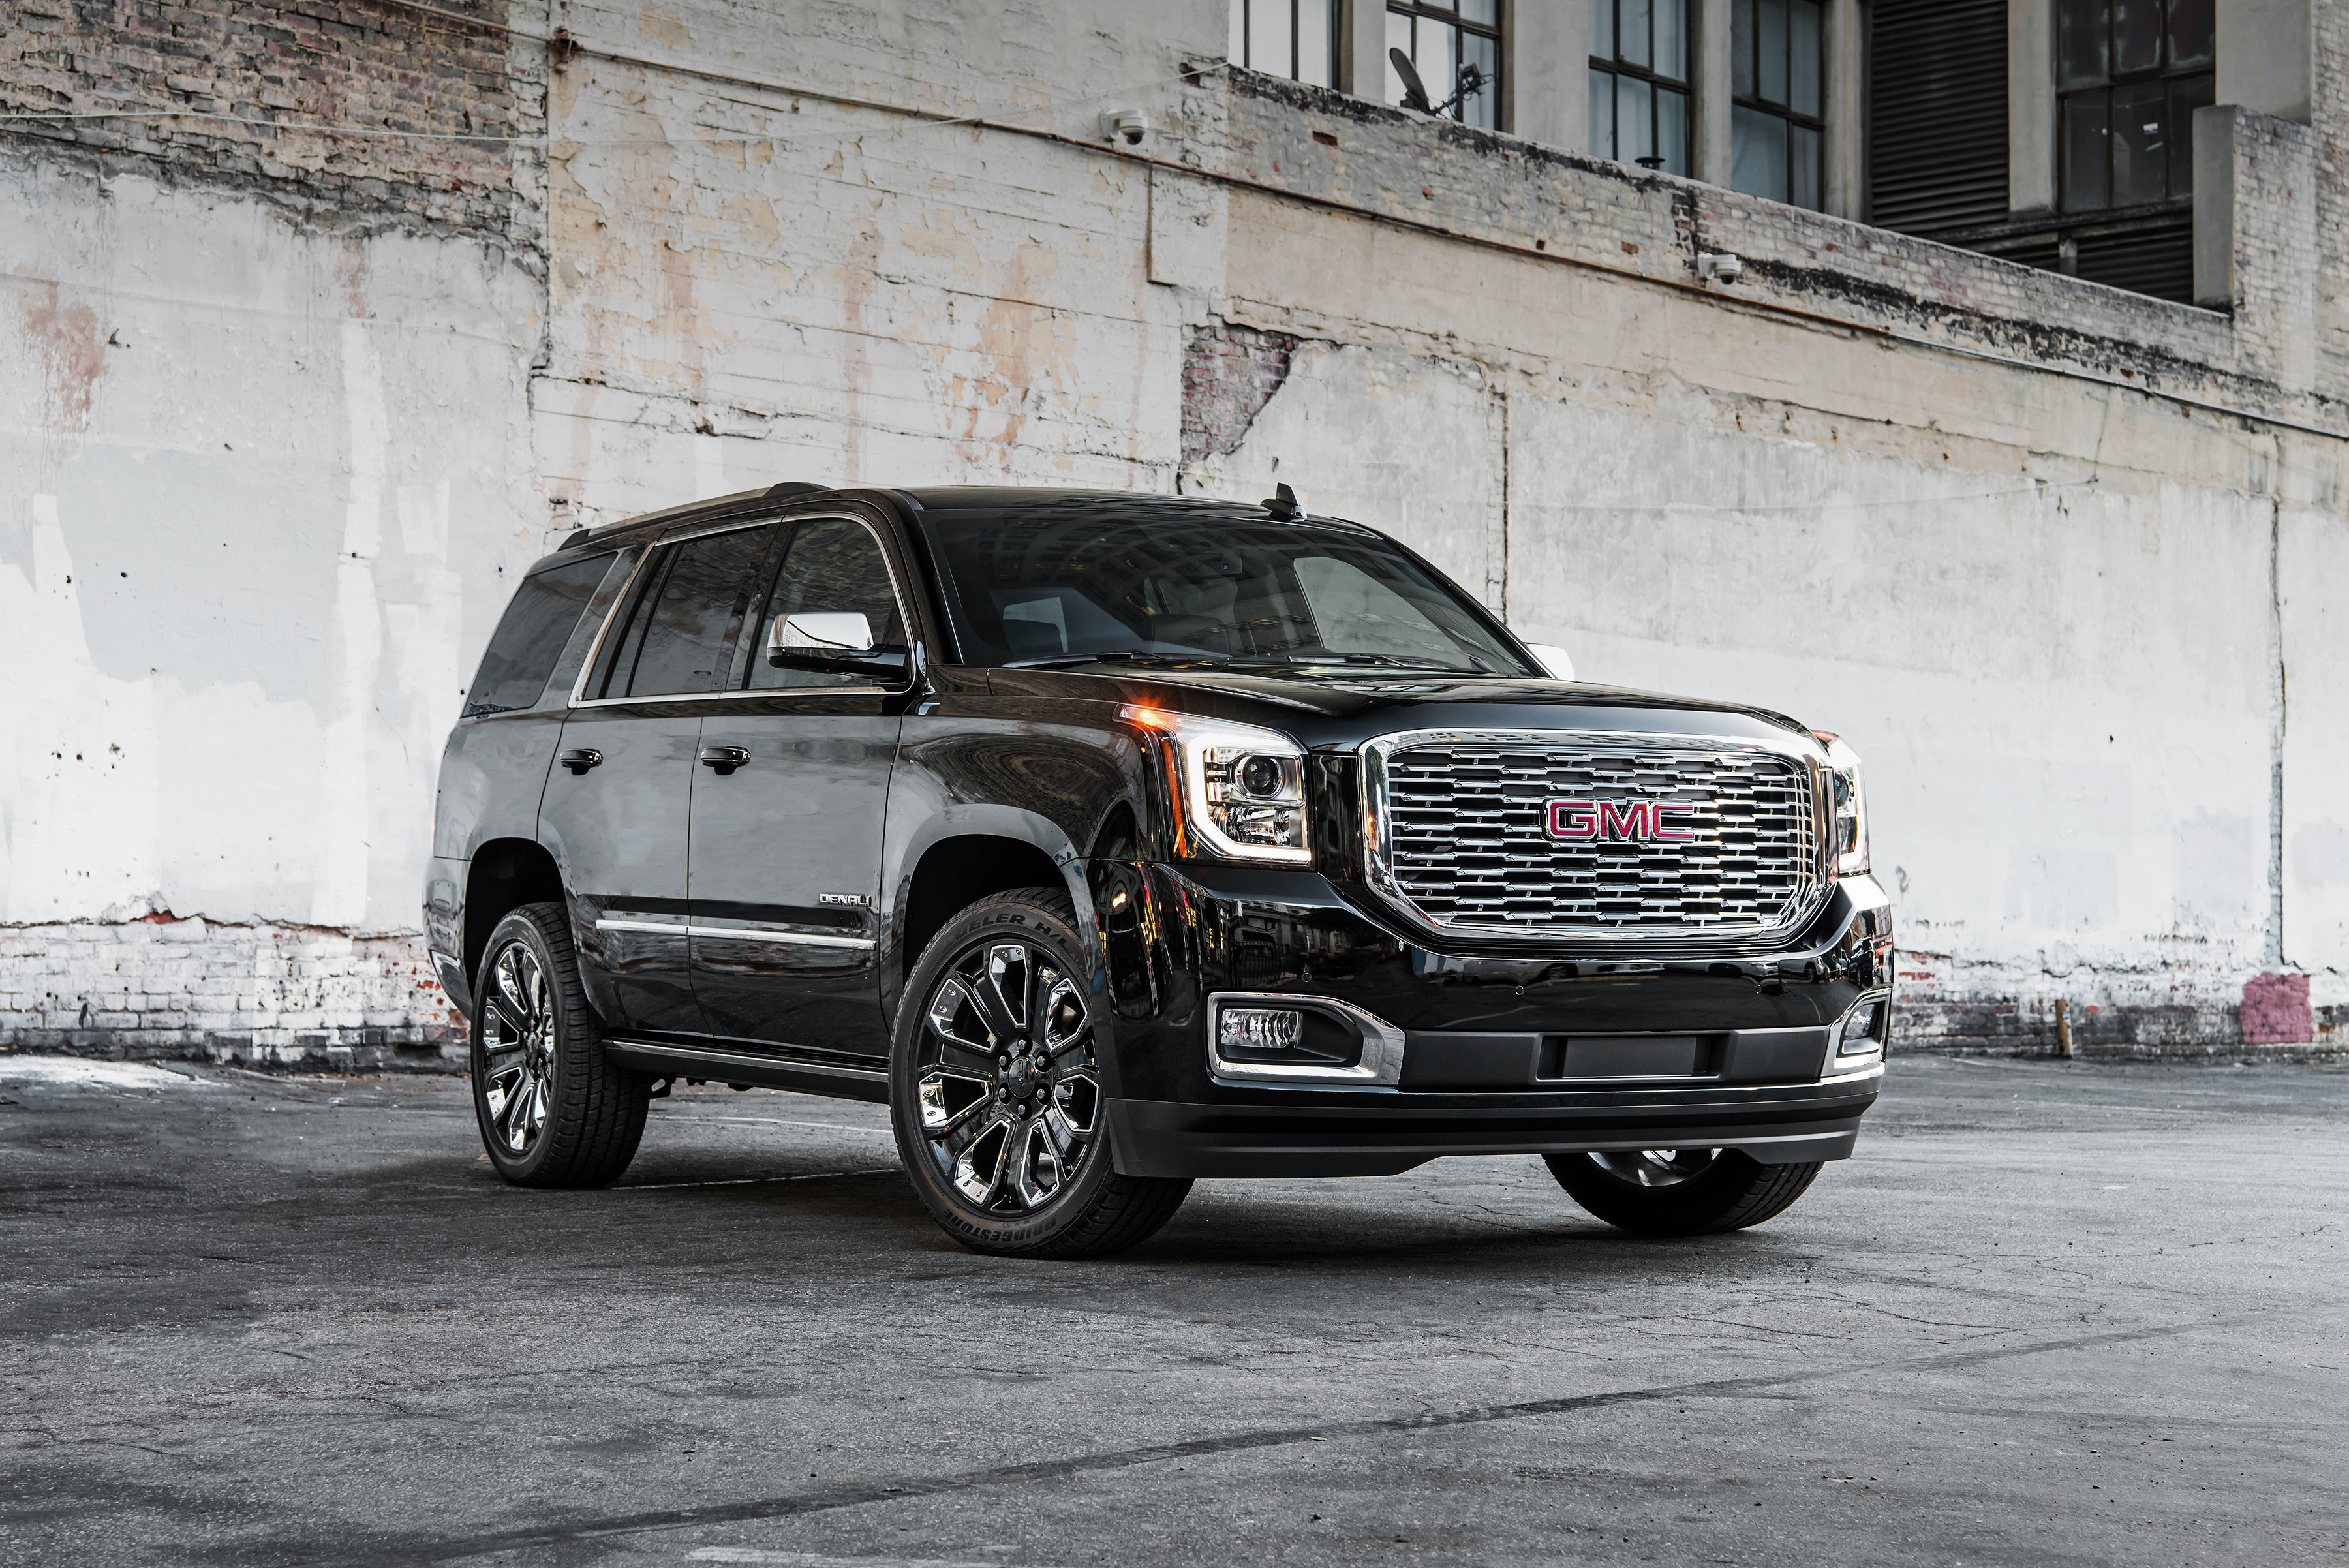 GMC Goes All Out with the 2018 Yukon Denali Ultimate Black Edition